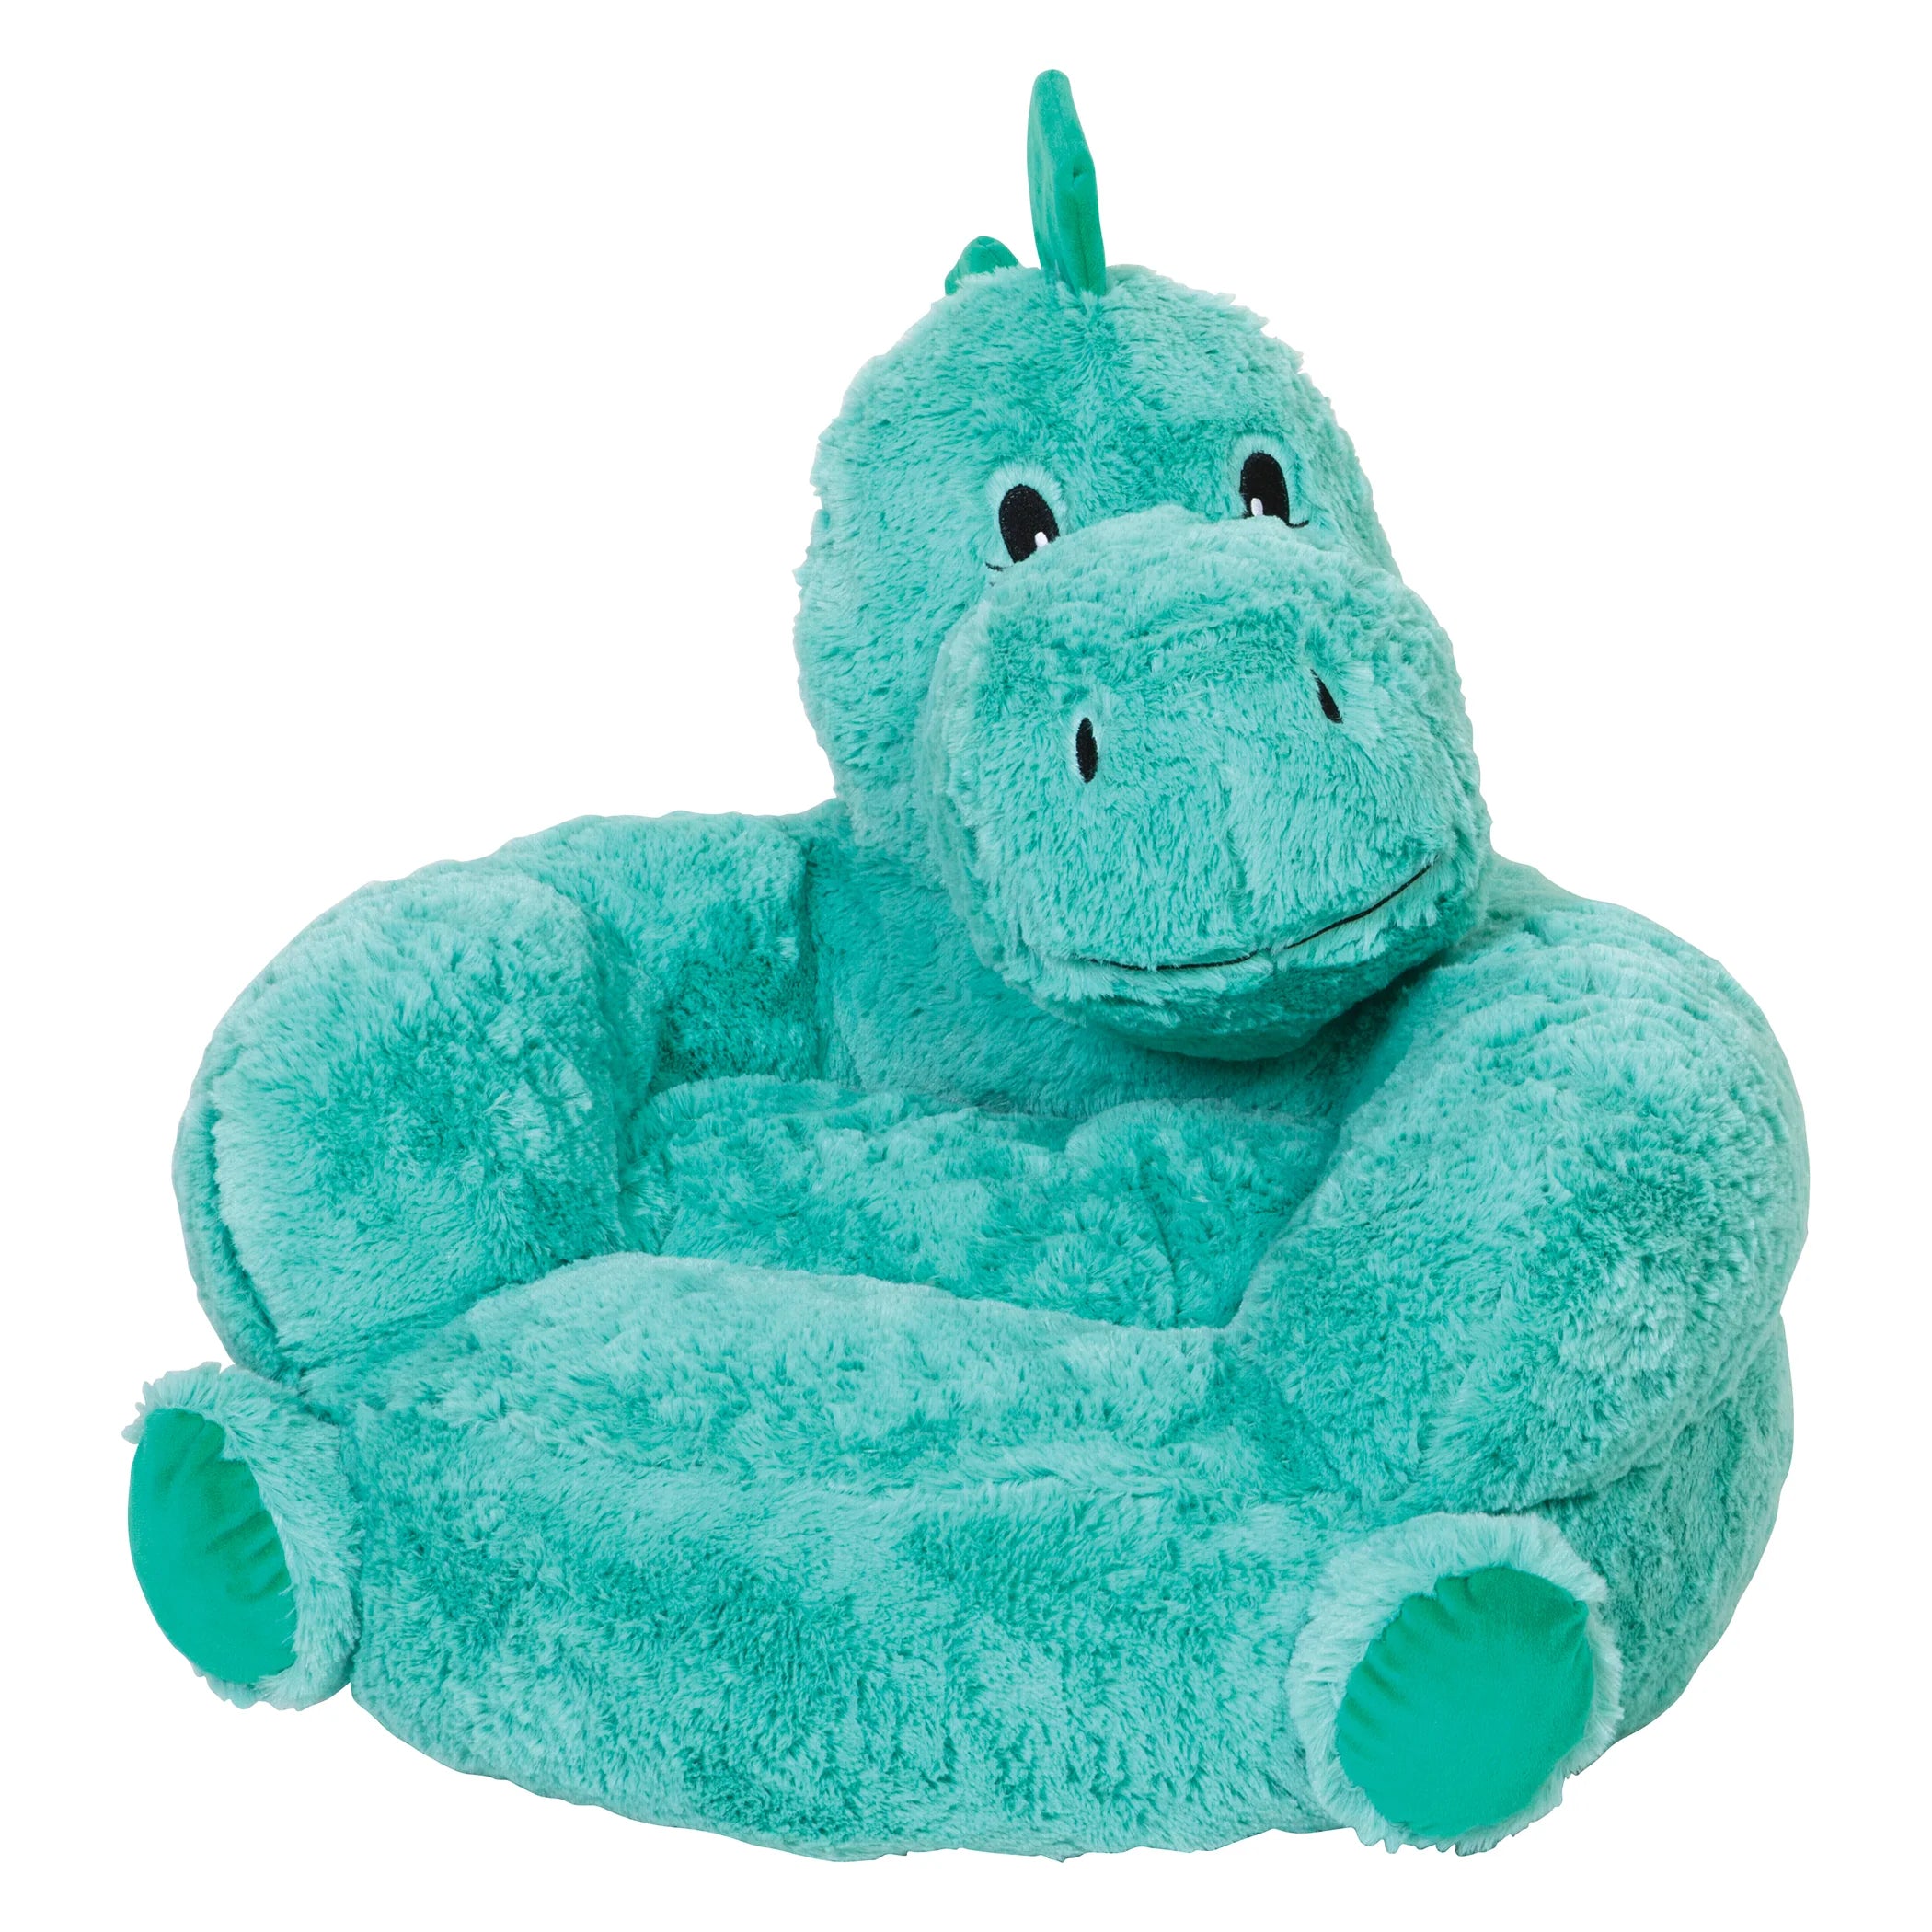 Friendly Dinosaur Toddler Chair - Simply Unique Baby Gifts